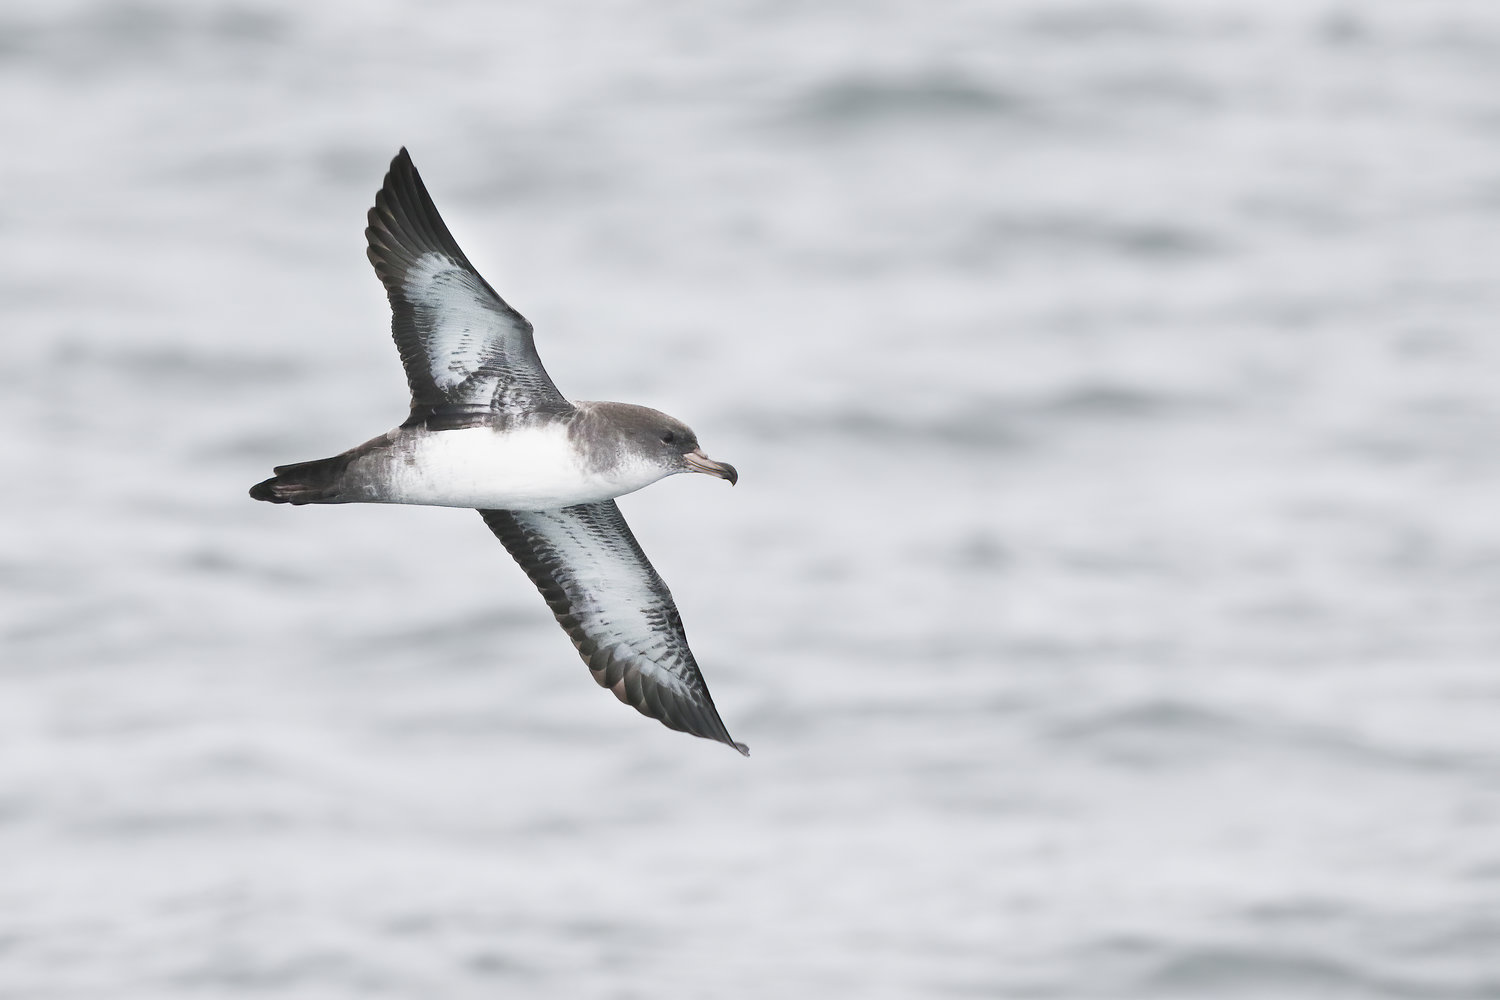 Pink-footed shearwater (Ardenna creatopus).